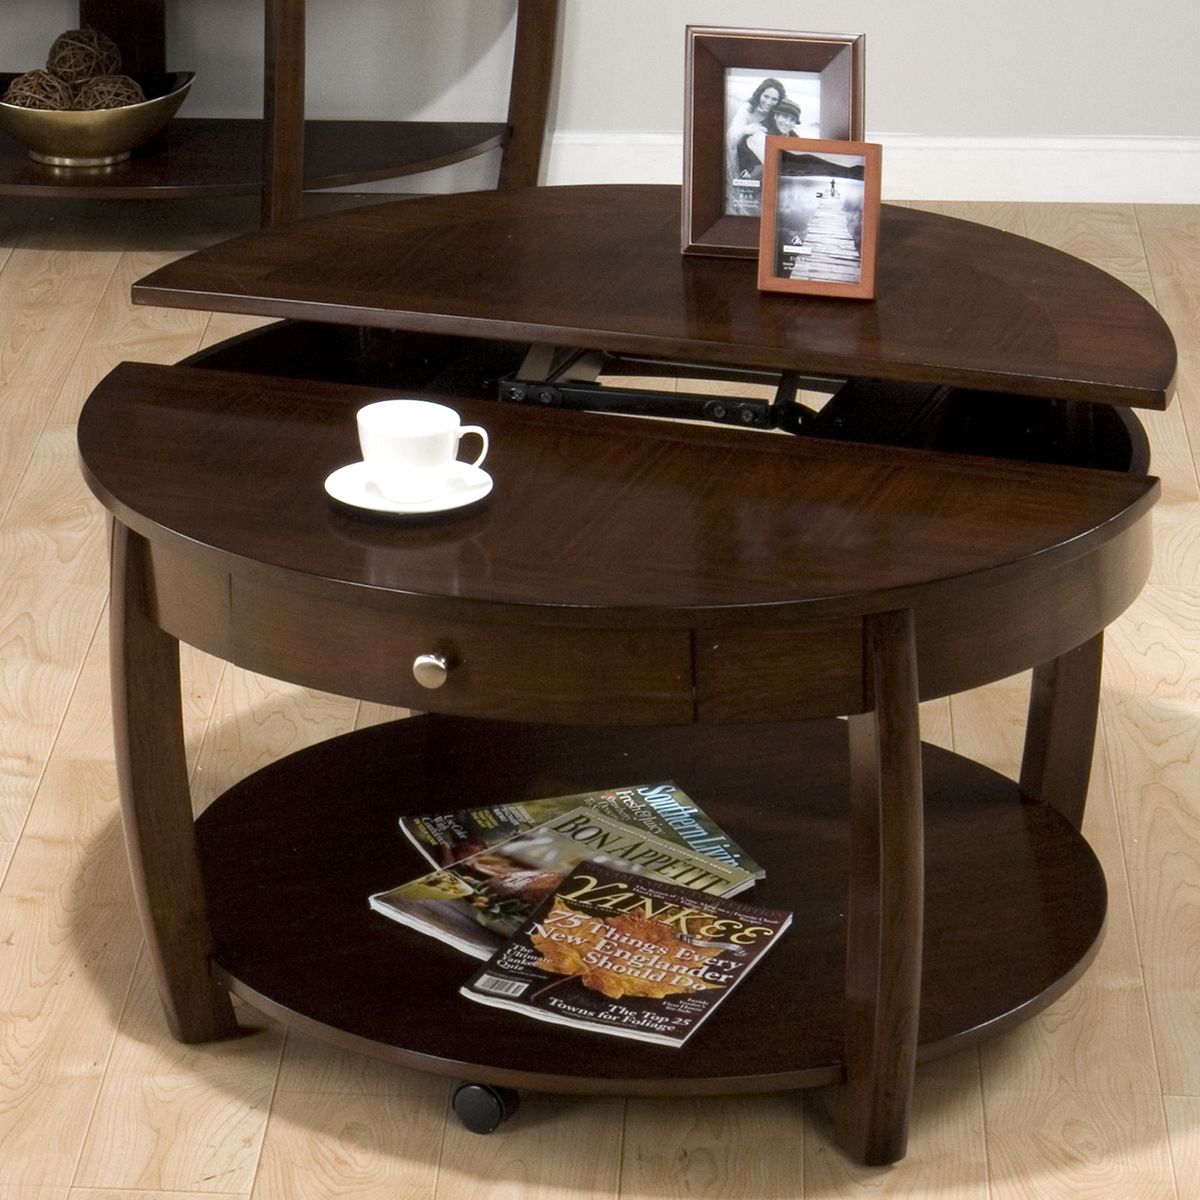 The Round Coffee Tables With Storage – The Simple And Compact Furniture Within Coffee Tables With Open Storage Shelves (View 12 of 20)